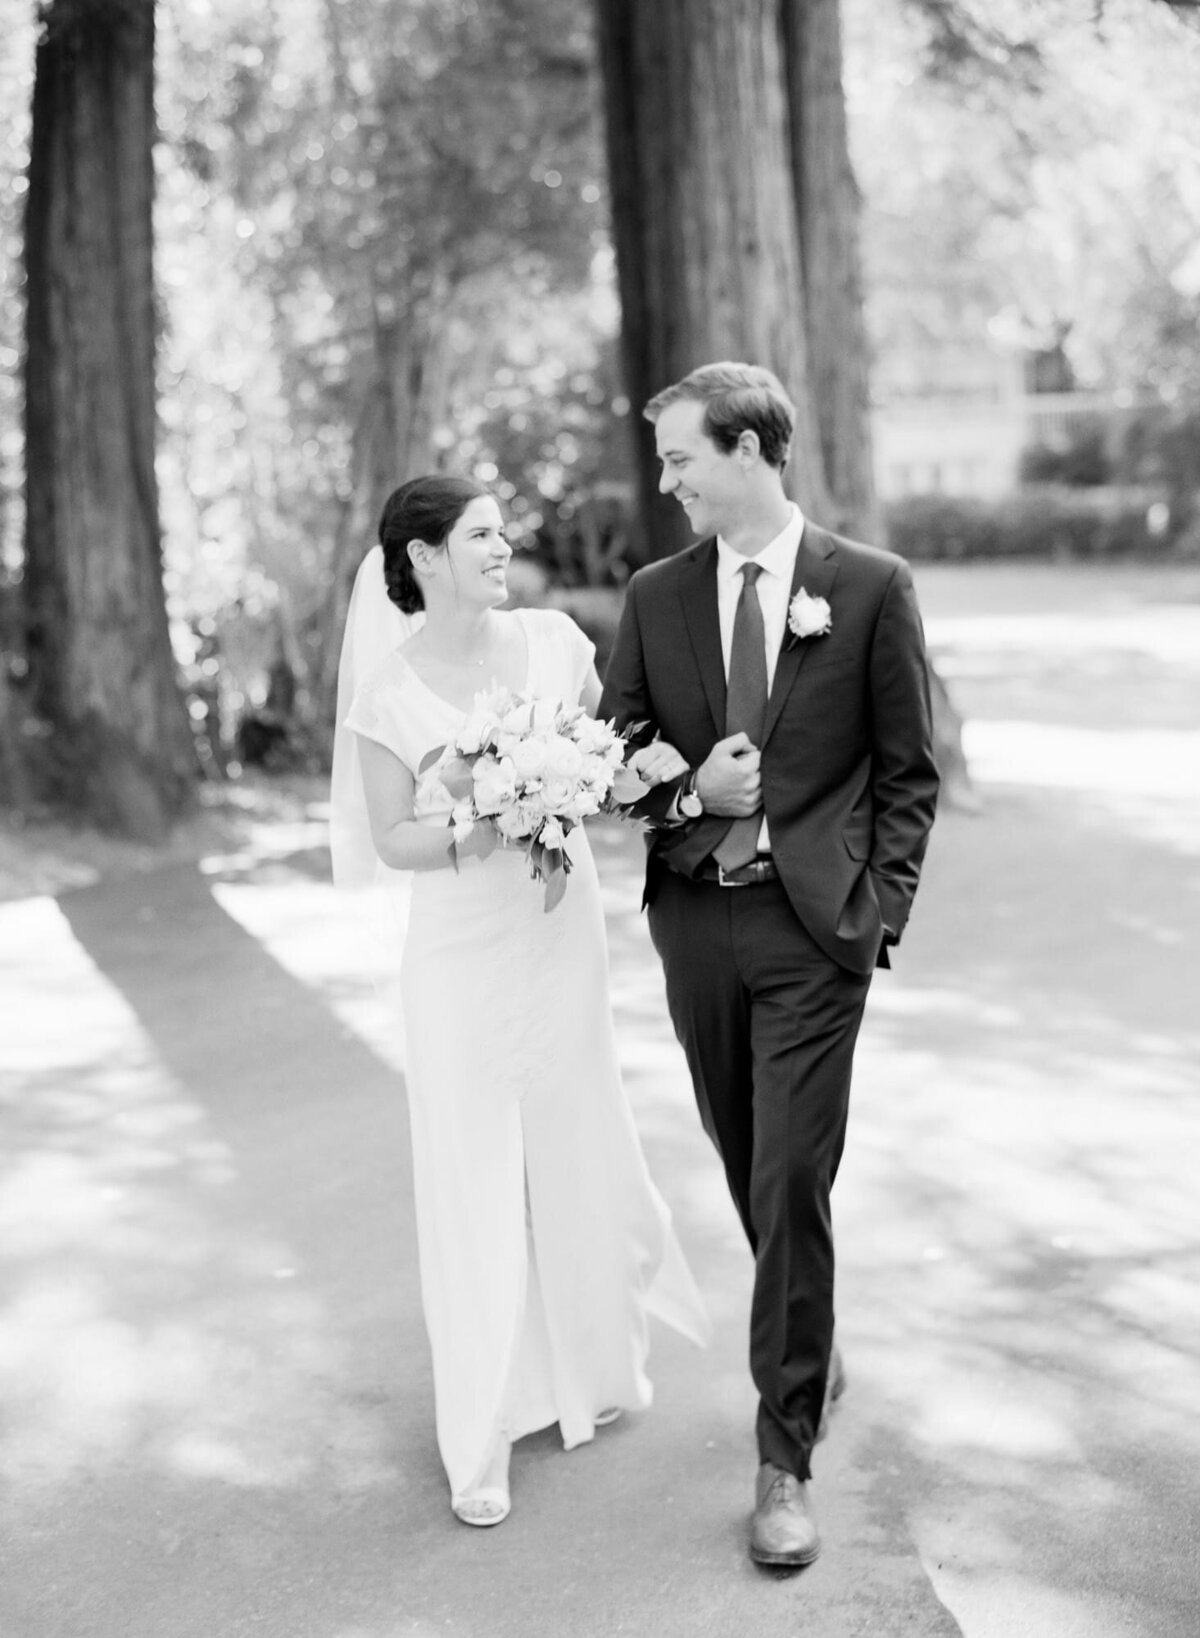 A successful marriage requires falling in love many times, always with the same person. Grayscale picture of a newly-wed shot by wedding photographer Robin Jolin.